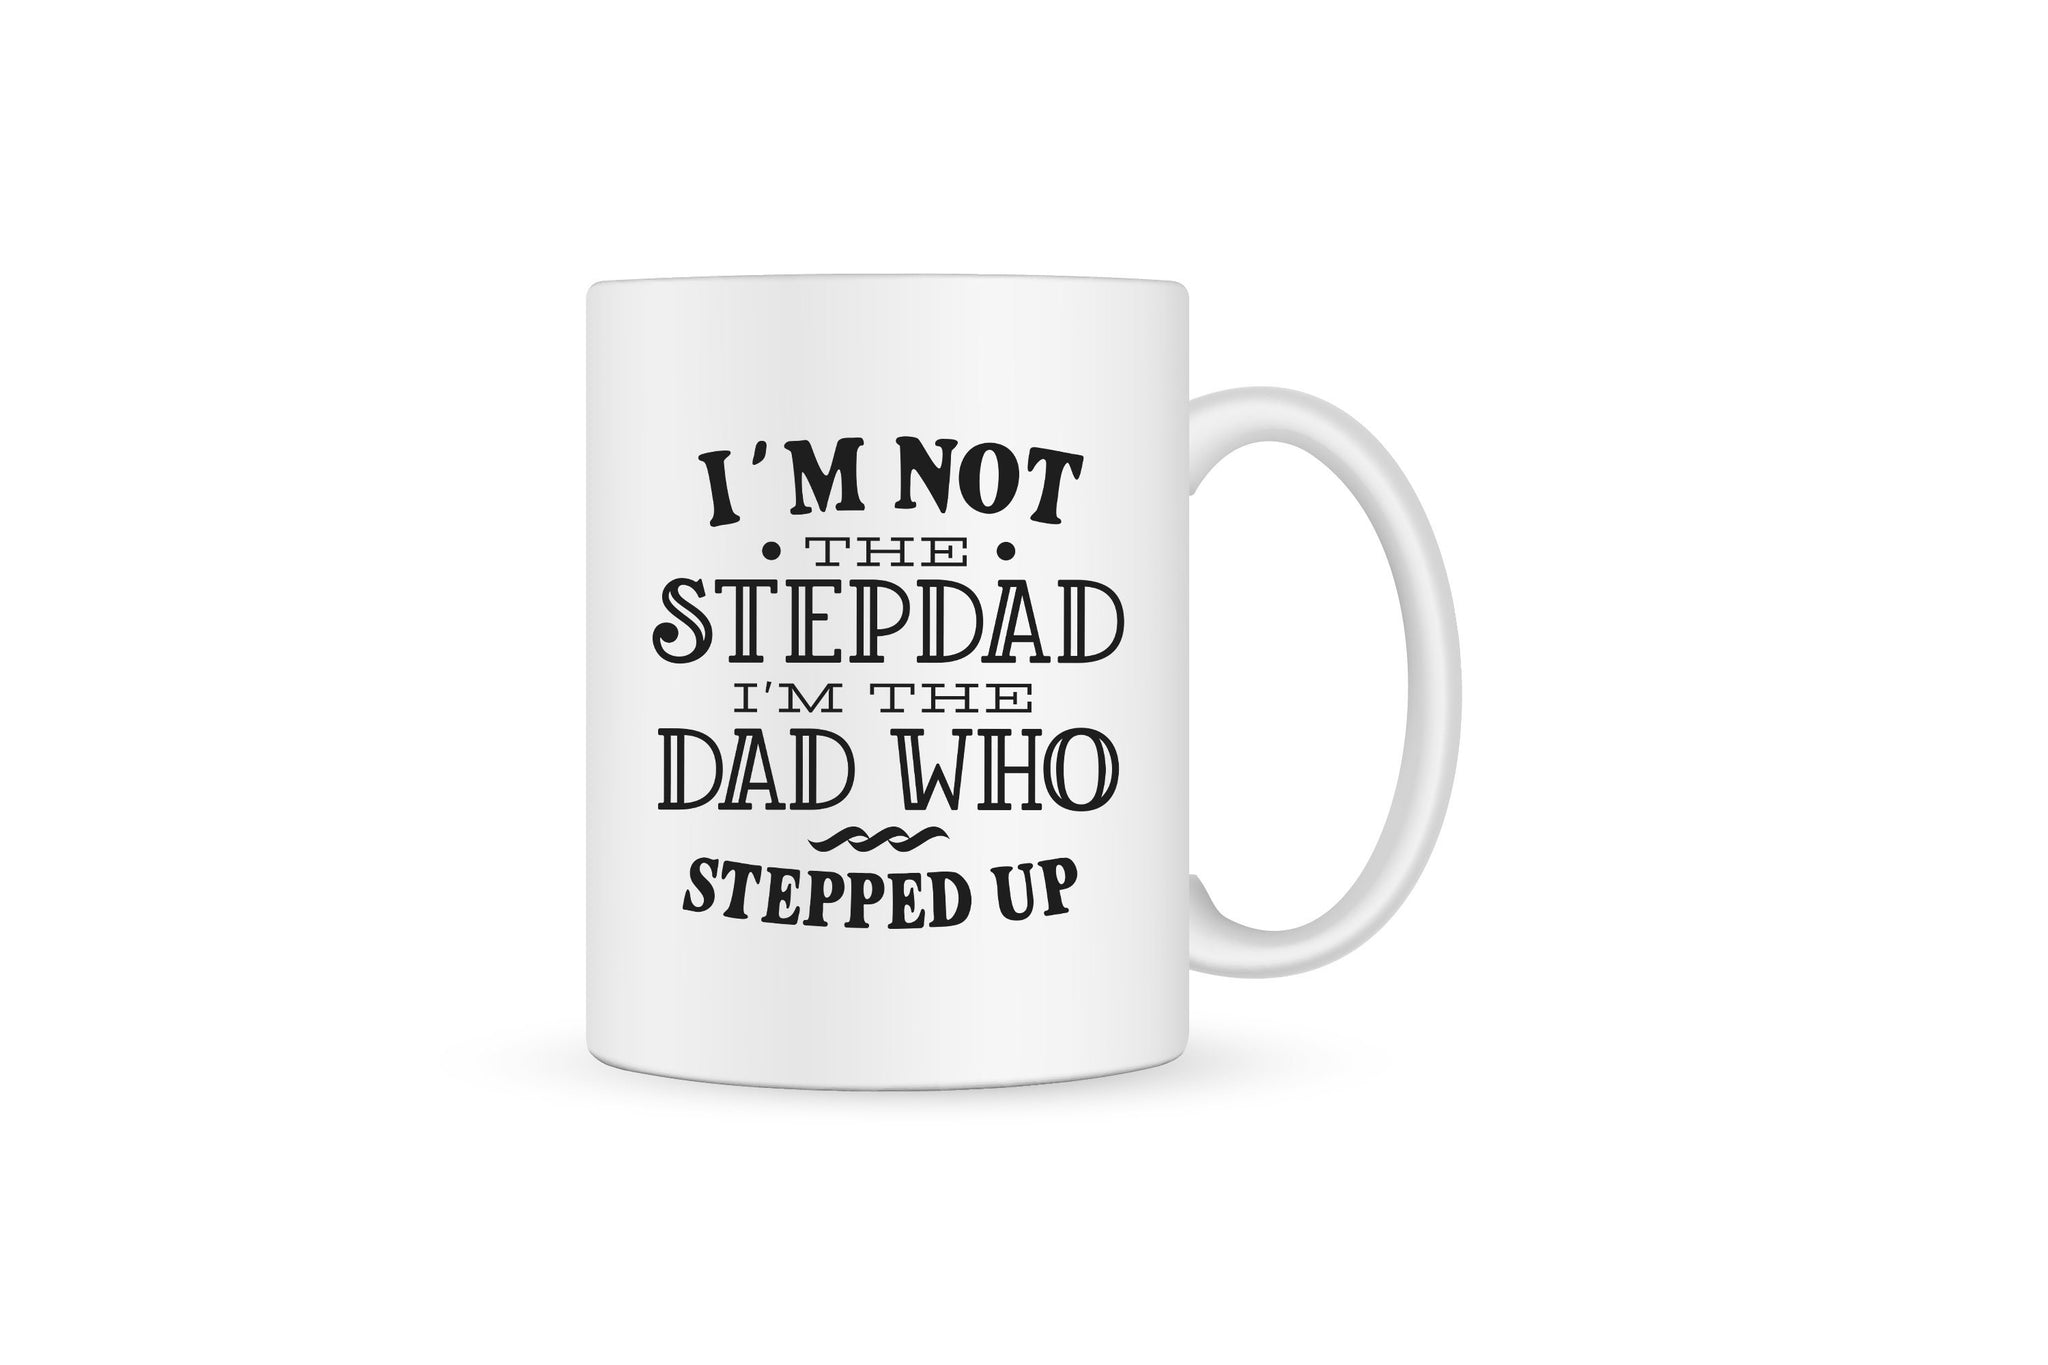 I'm Not The Stepdad I'm The Dad Who Stepped Up Fathers Day Coffee Mug Gift For Stepdad, The Man Who Stepped Up Meaningful Gift For Stepdad